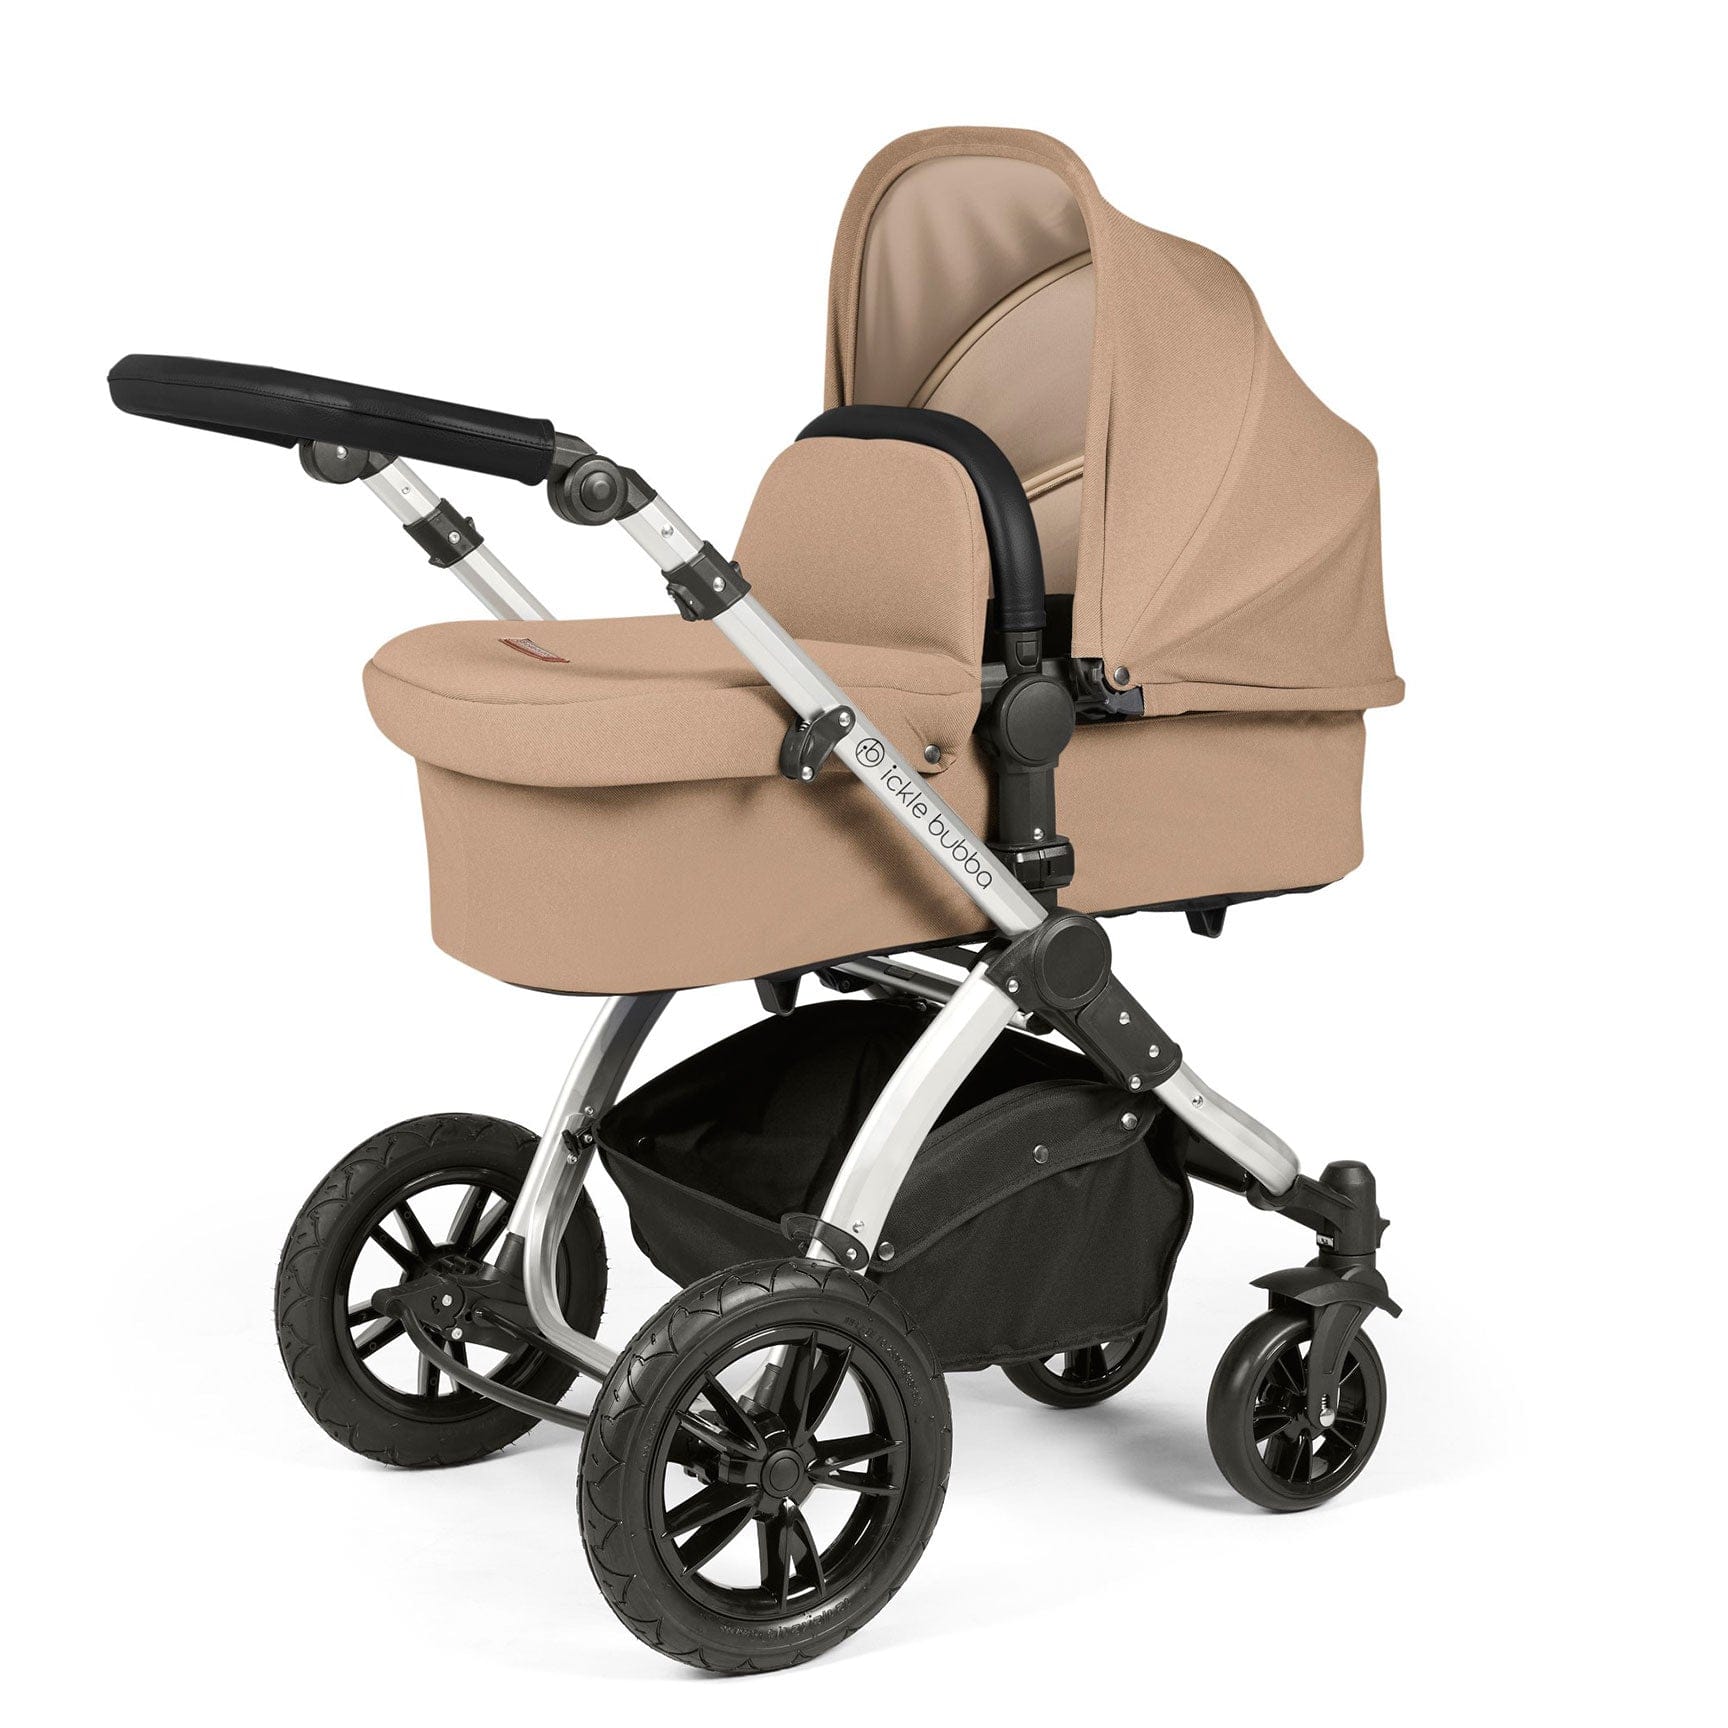 Ickle Bubba travel systems Ickle Bubba Stomp Luxe 2 in 1 Plus Pushchair & Carrycot - Silver/Desert/Black 10-003-001-257